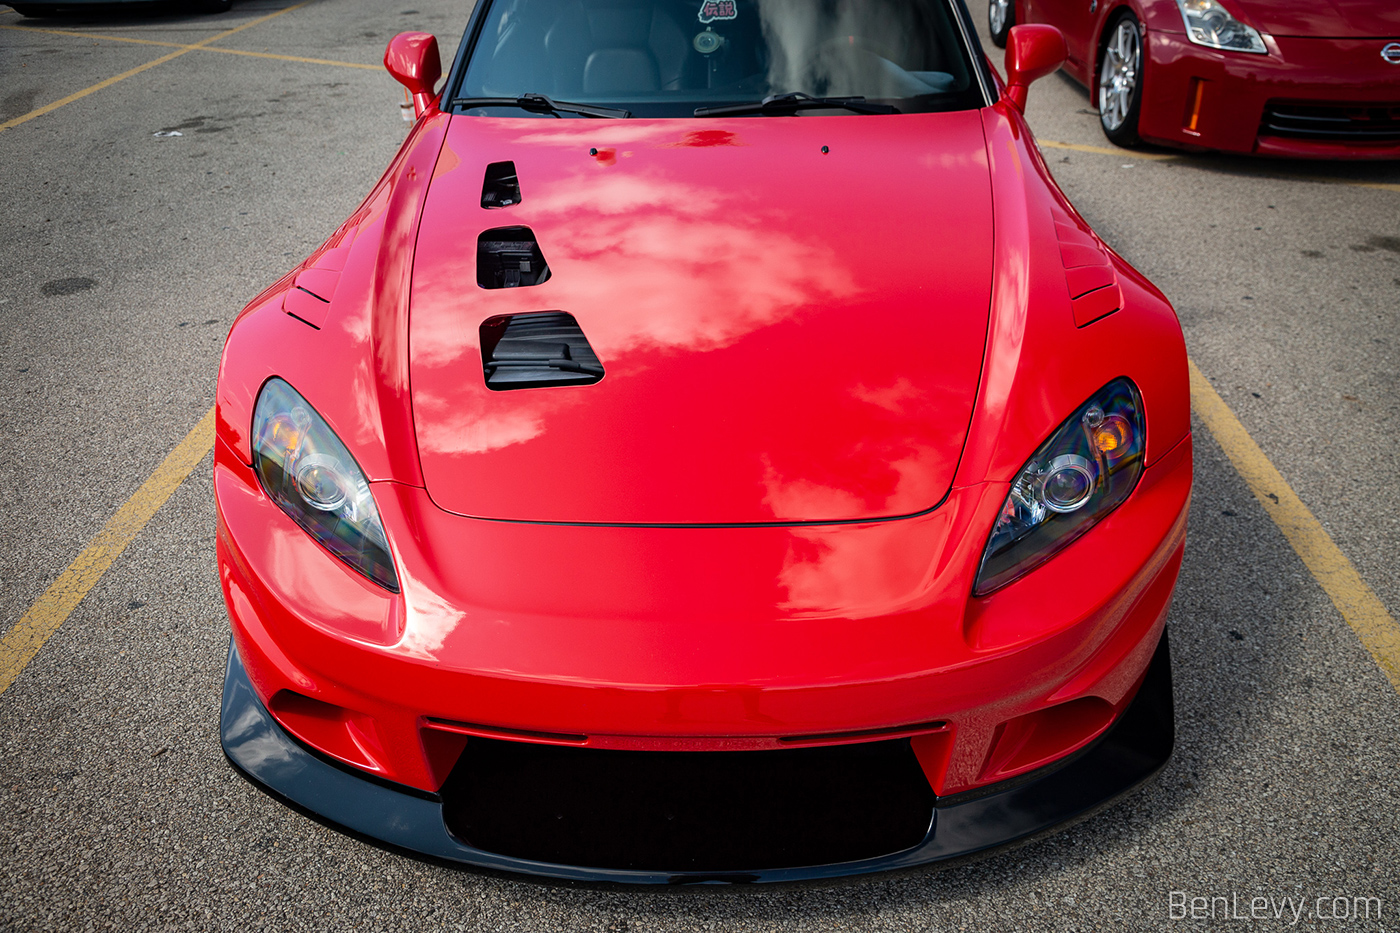 Red S2000 with Fender Vents